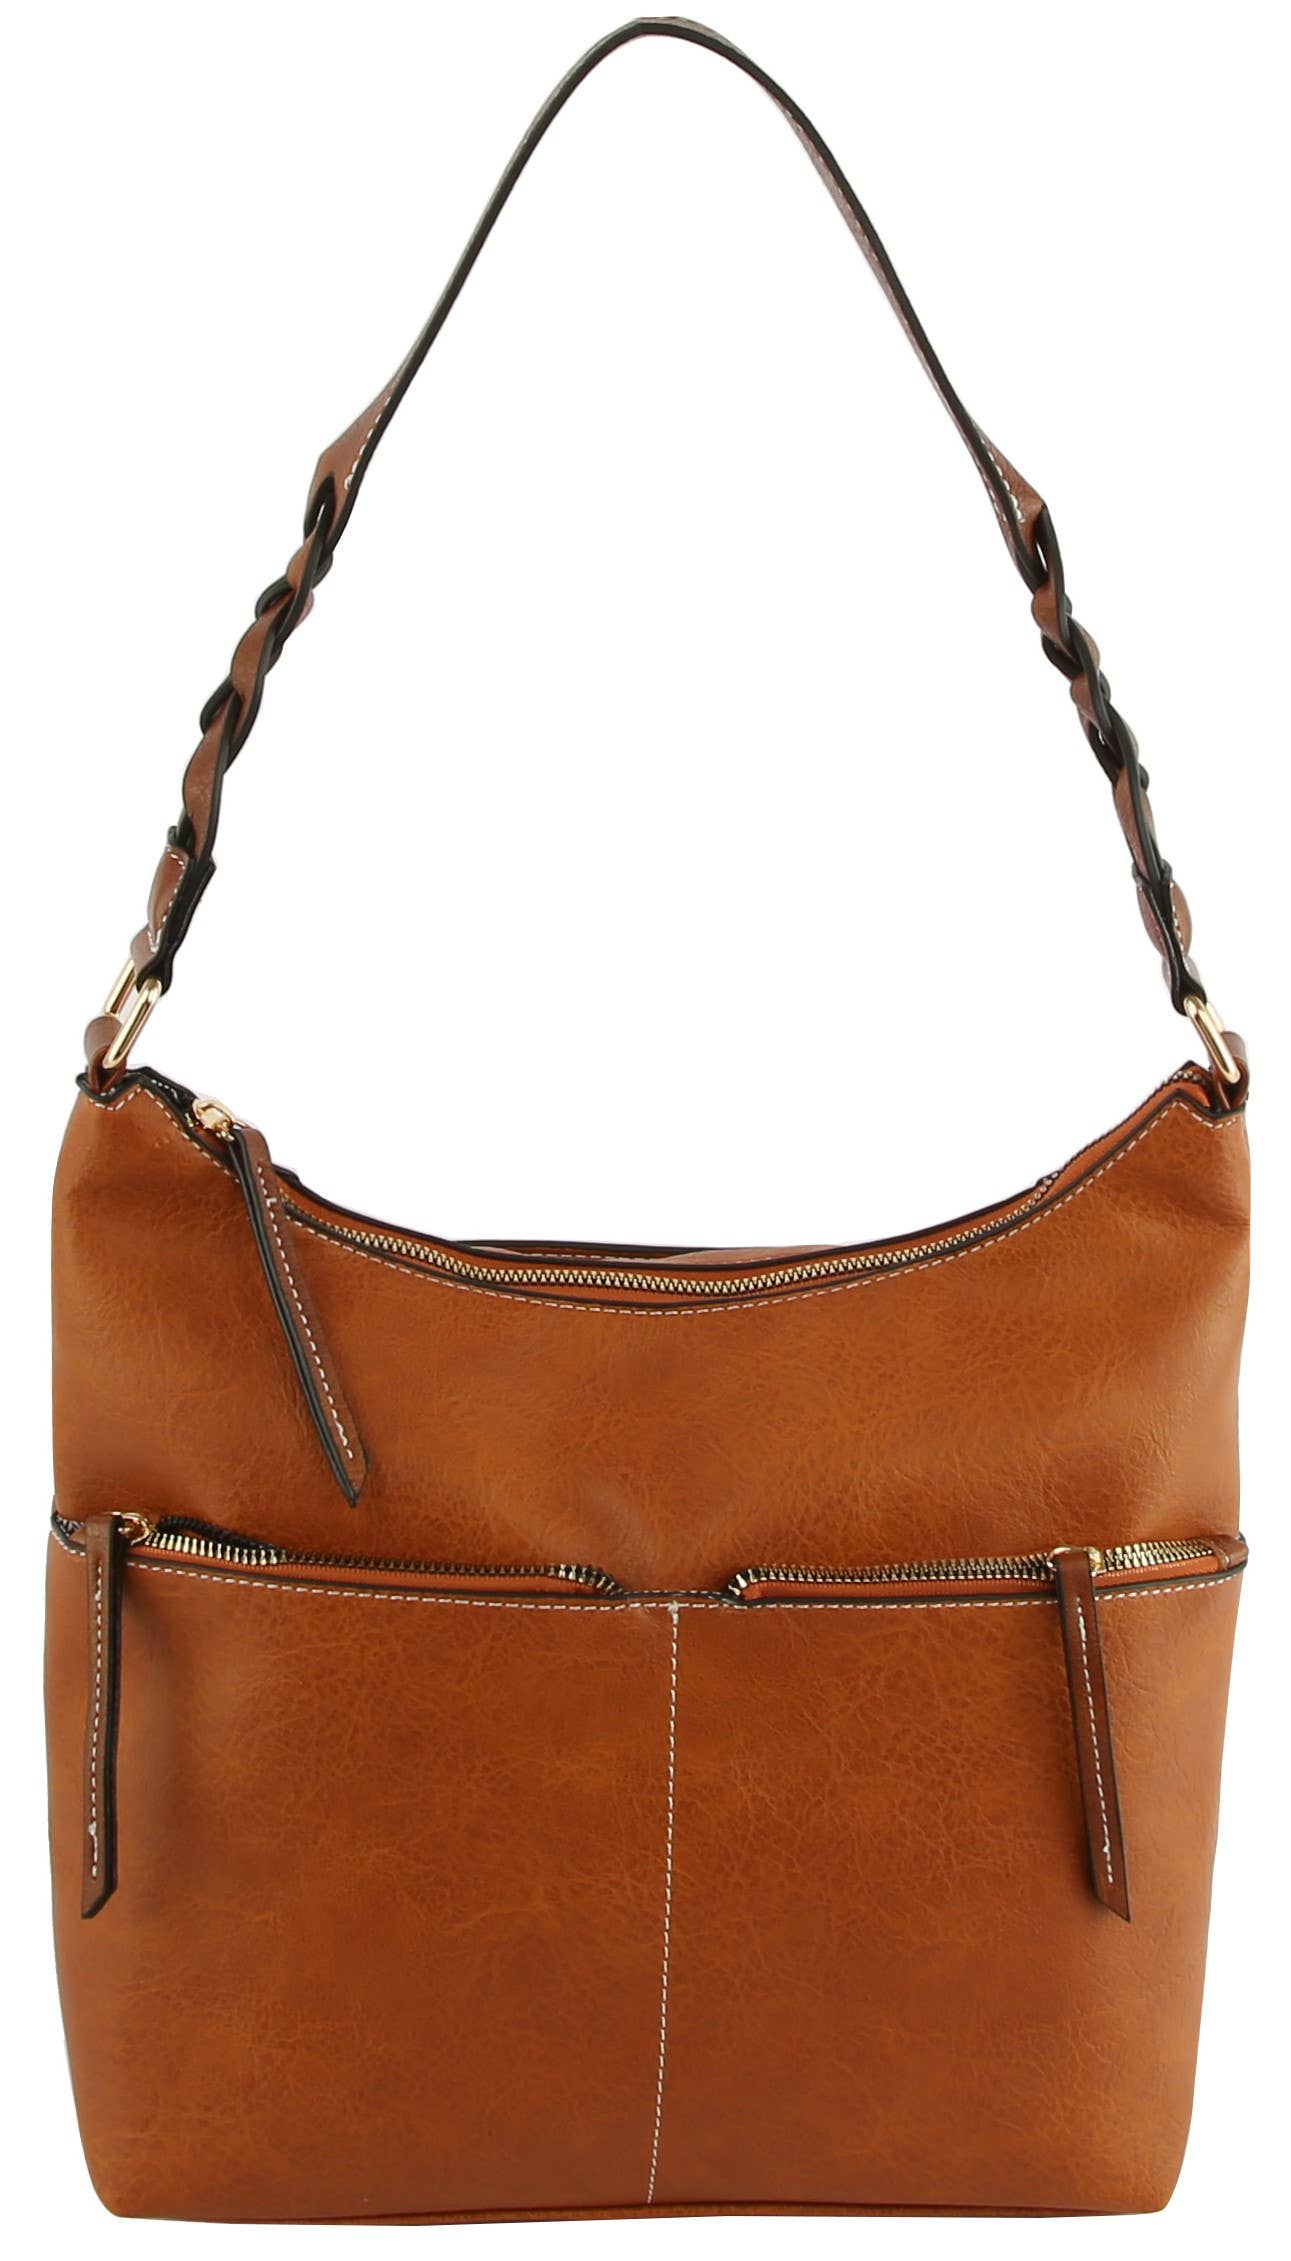 Brown with Zipper Pockets Purse